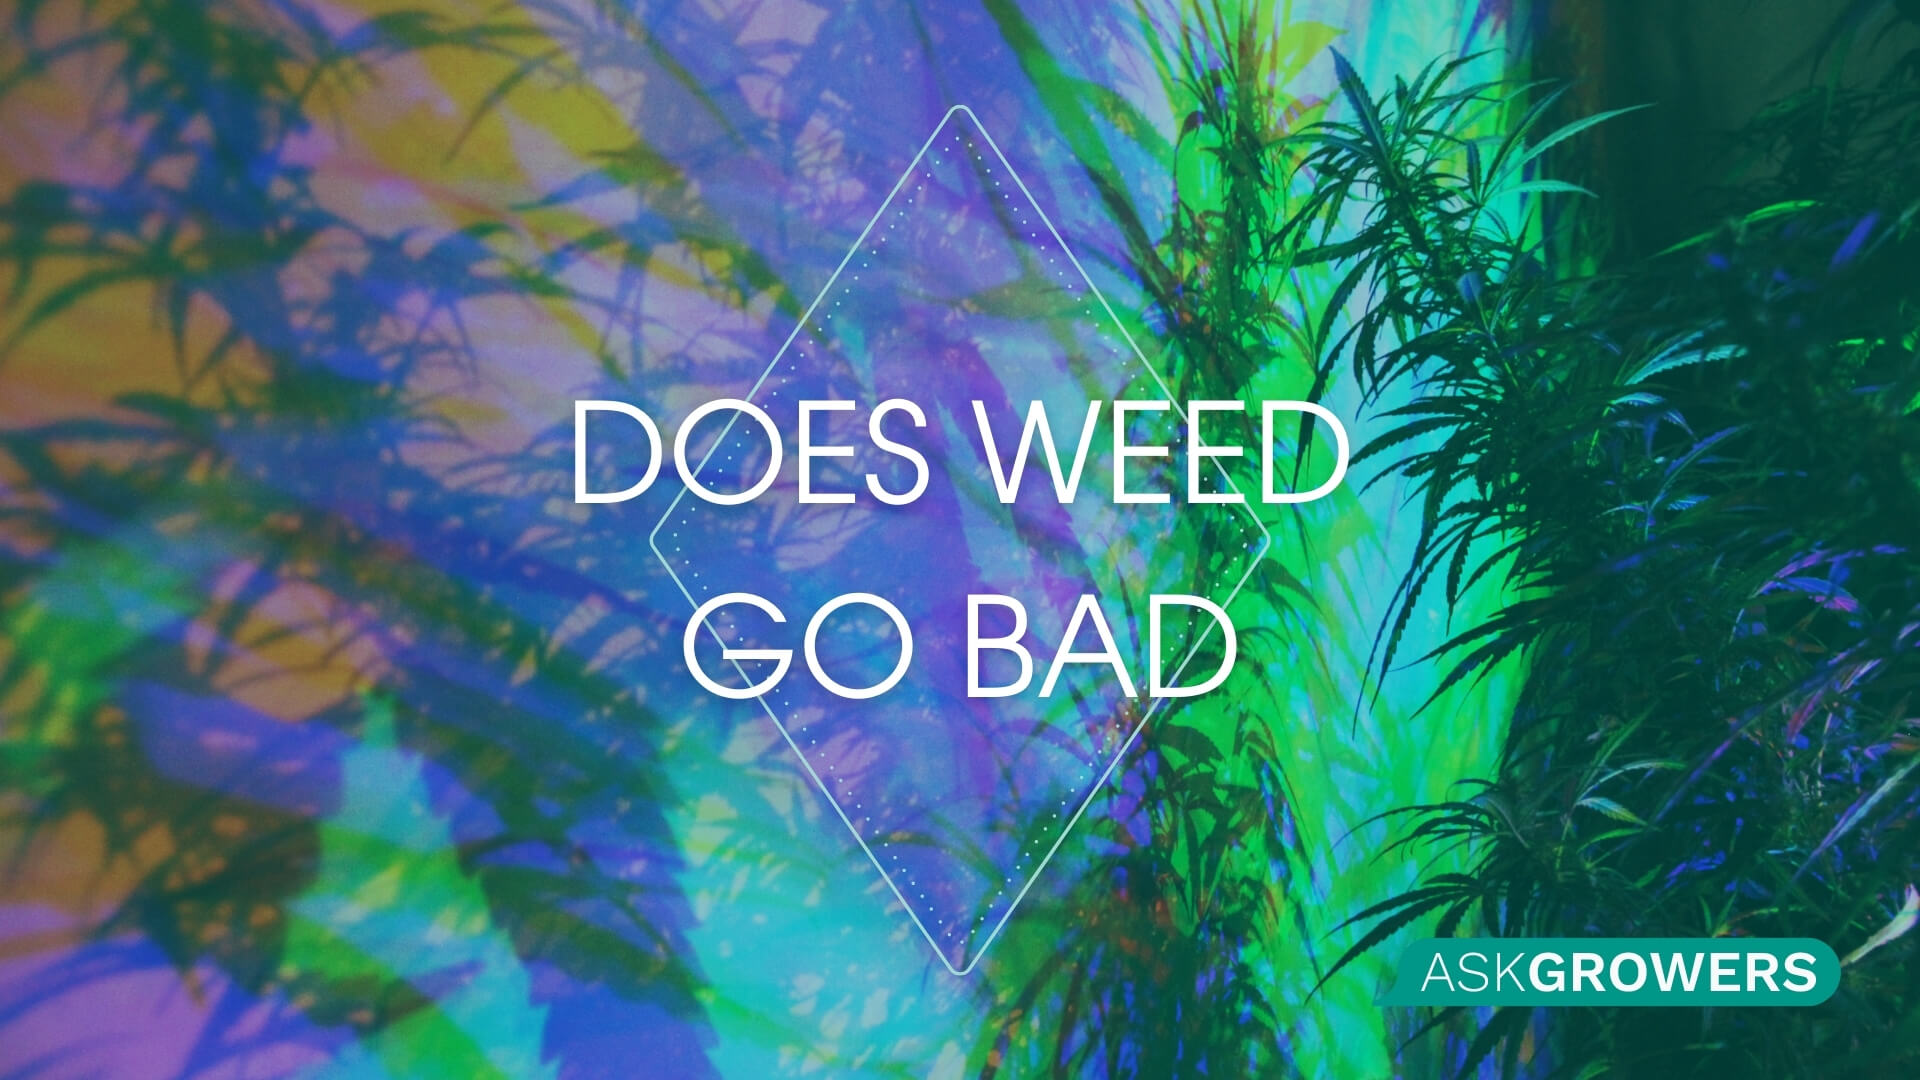 Does Weed Go Bad & How to Identify Old Marijuana? Updated by Expert Opinions